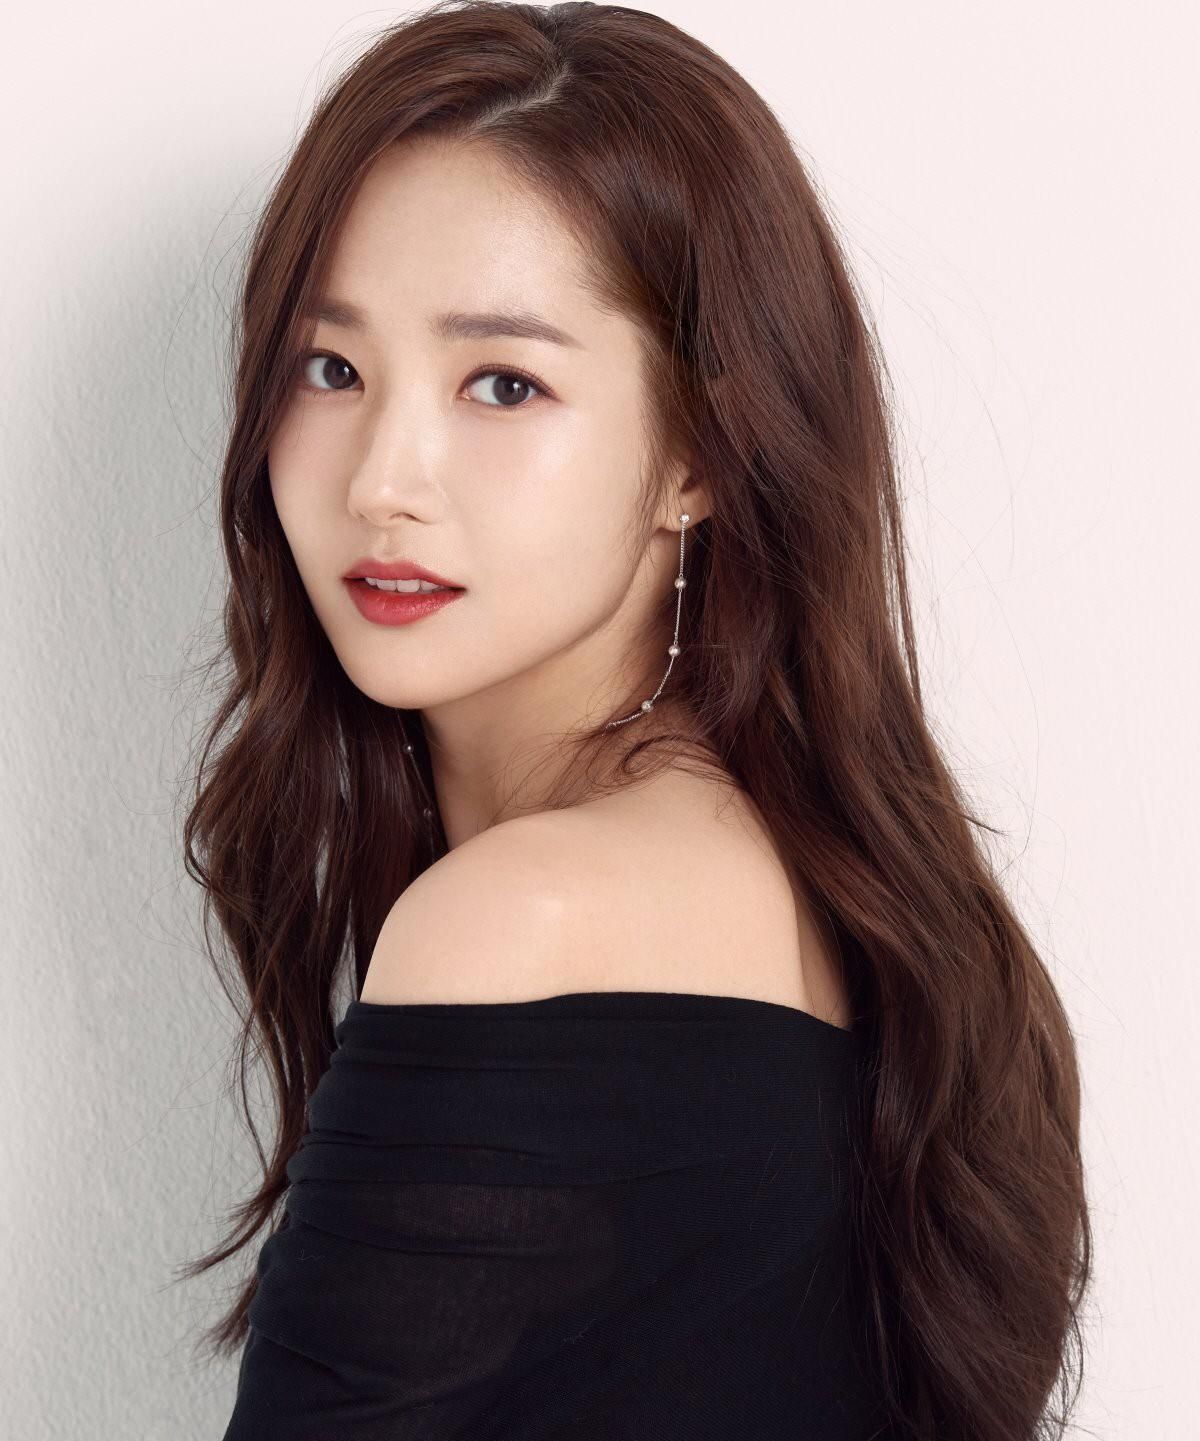 5-actresses-have-the-highest-priority-of-casting-in-2020-park-min-young